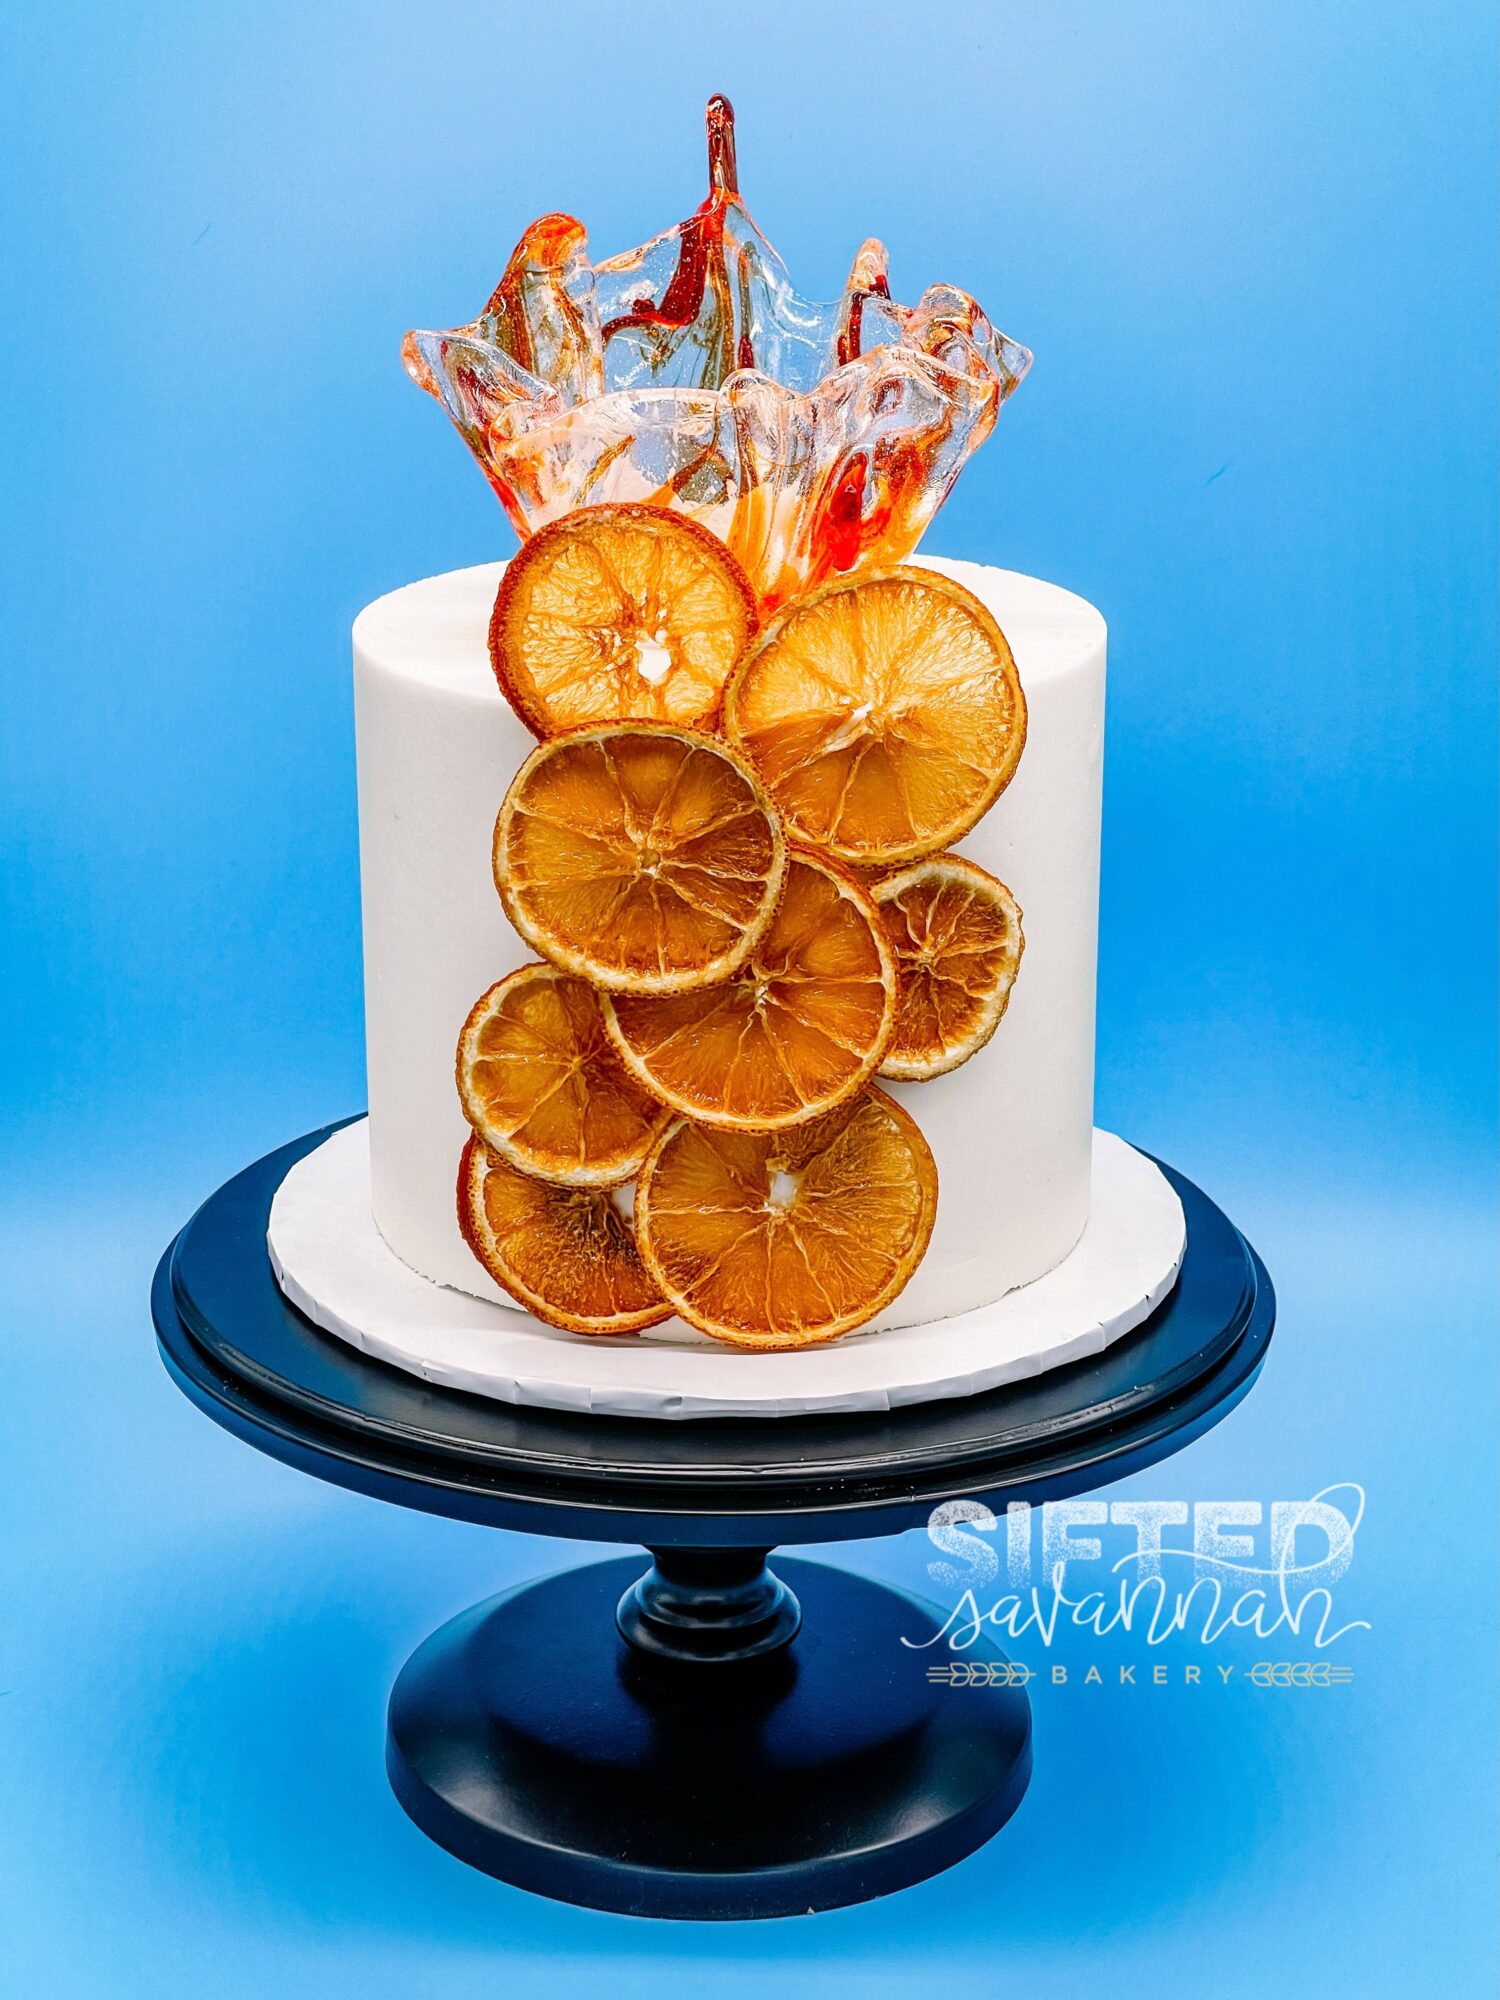 50+ Very Impressive and Breathtaking Cakes - Page 81 of 83